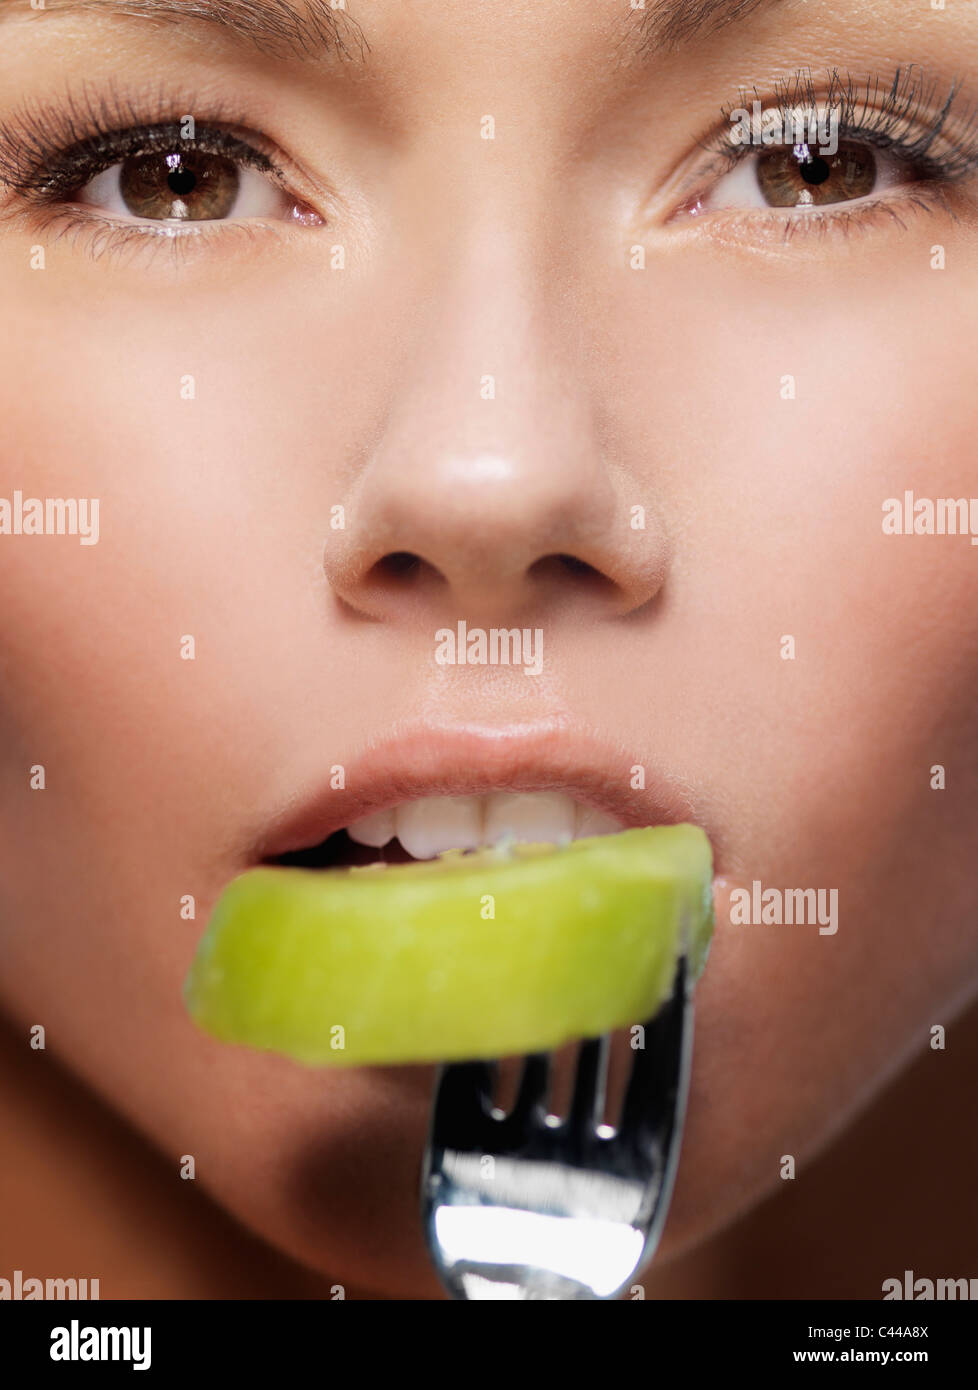 A woman biting a slice of kiwi on a fork, close-up of face Stock Photo